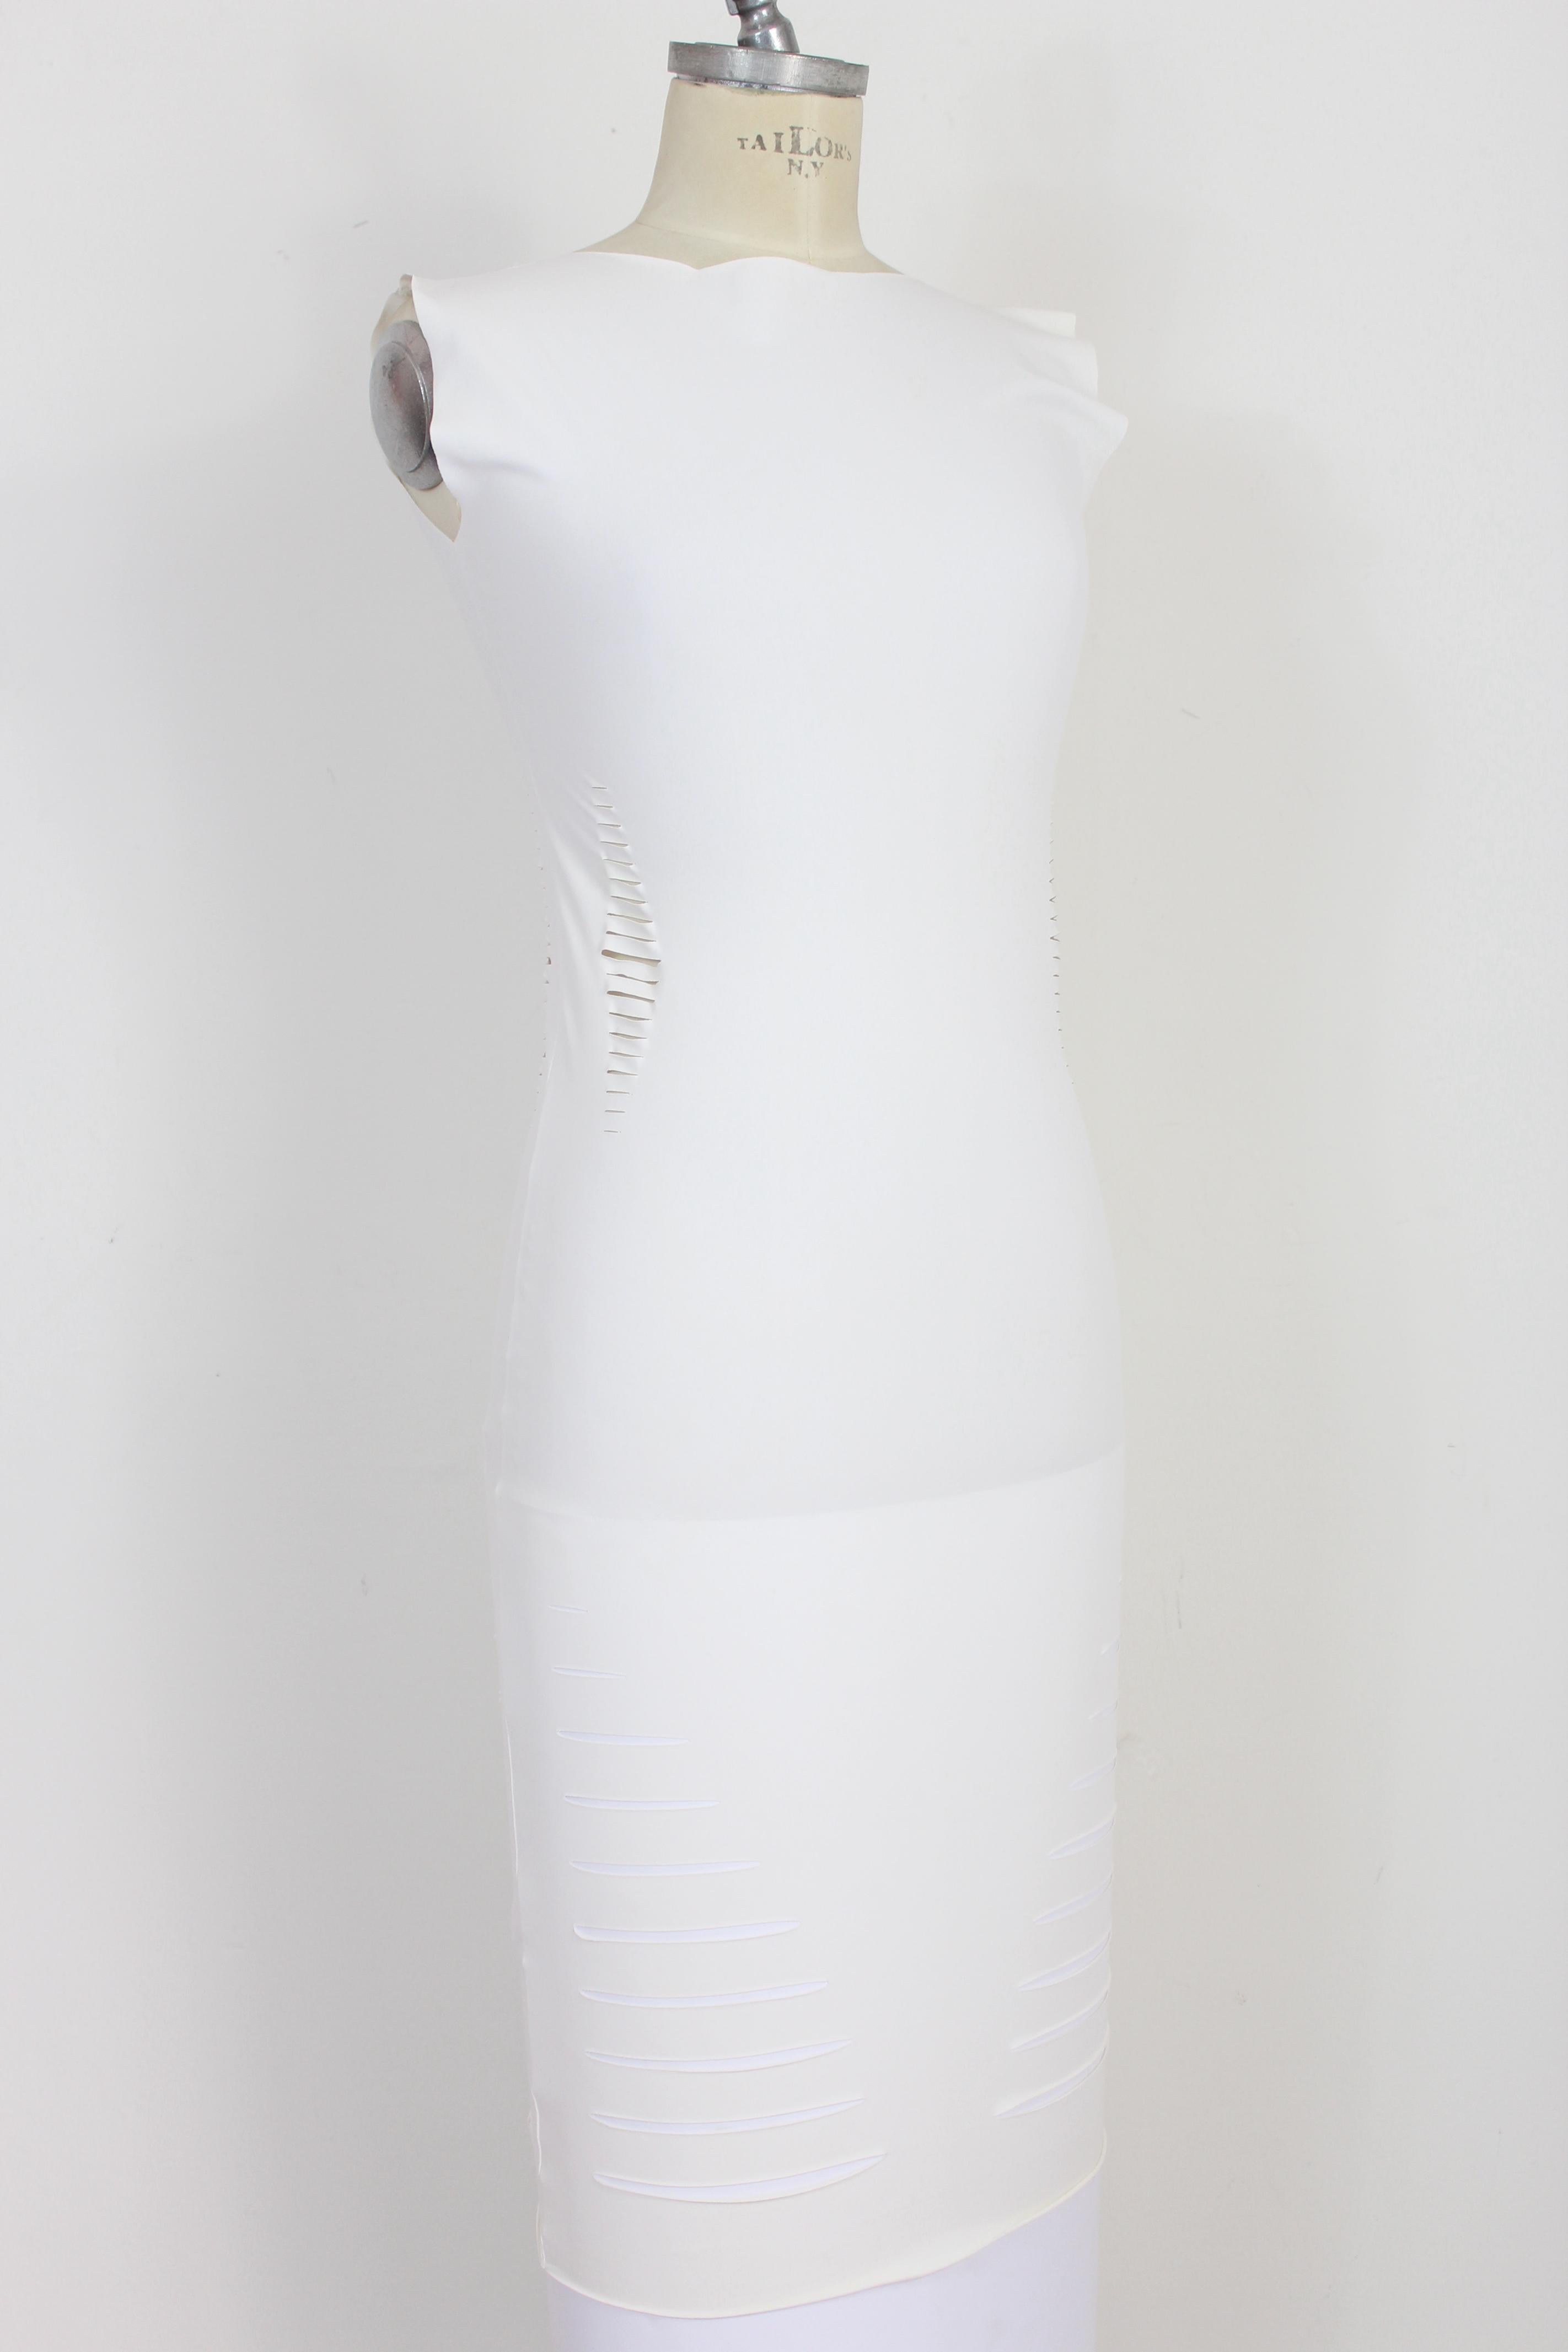 Cavalli White Laser Cut Sheath Fitted Party Dress 2000s In Excellent Condition In Brindisi, Bt